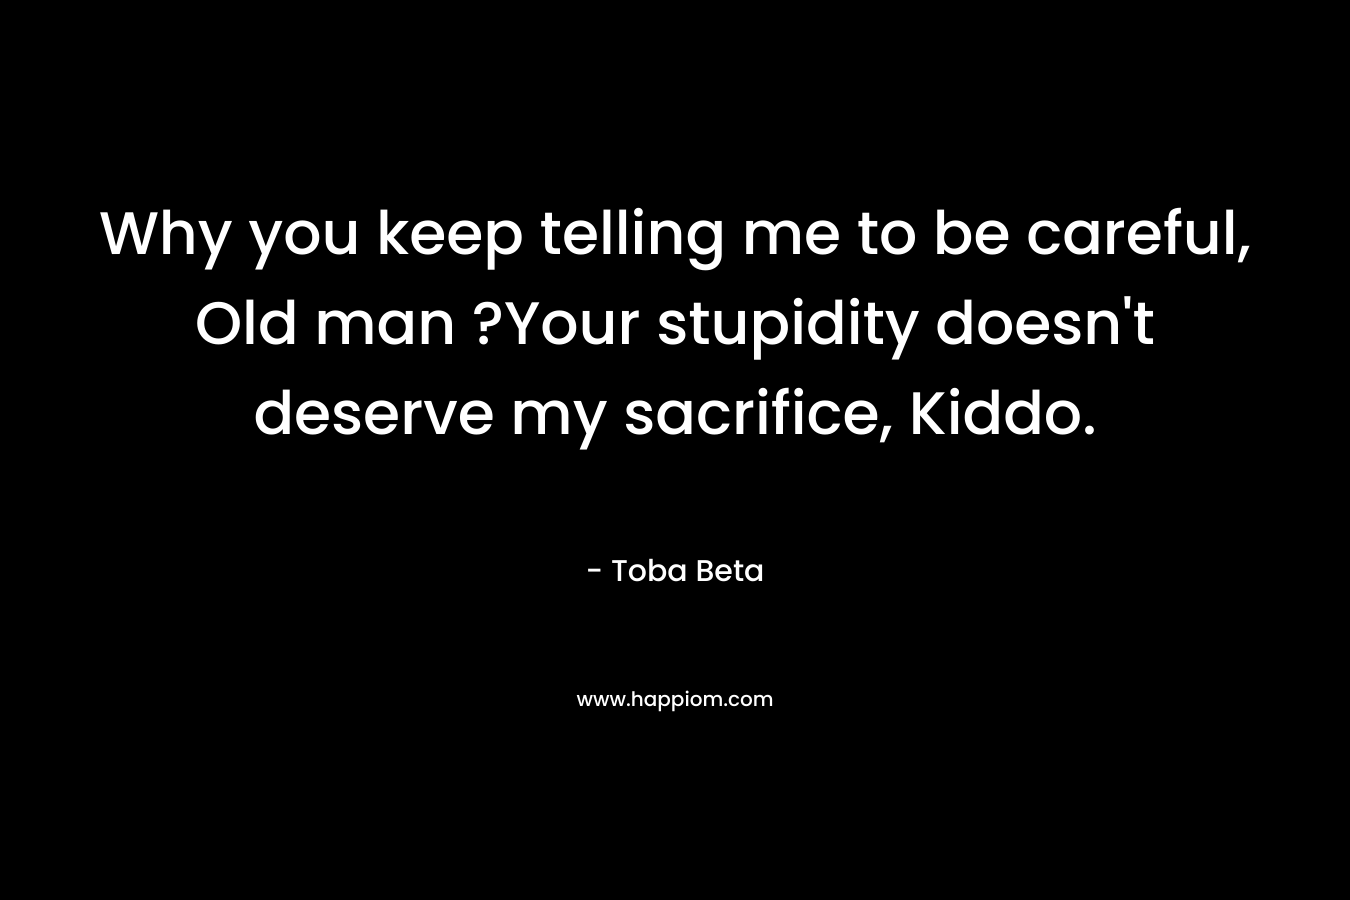 Why you keep telling me to be careful, Old man ?Your stupidity doesn’t deserve my sacrifice, Kiddo. – Toba Beta